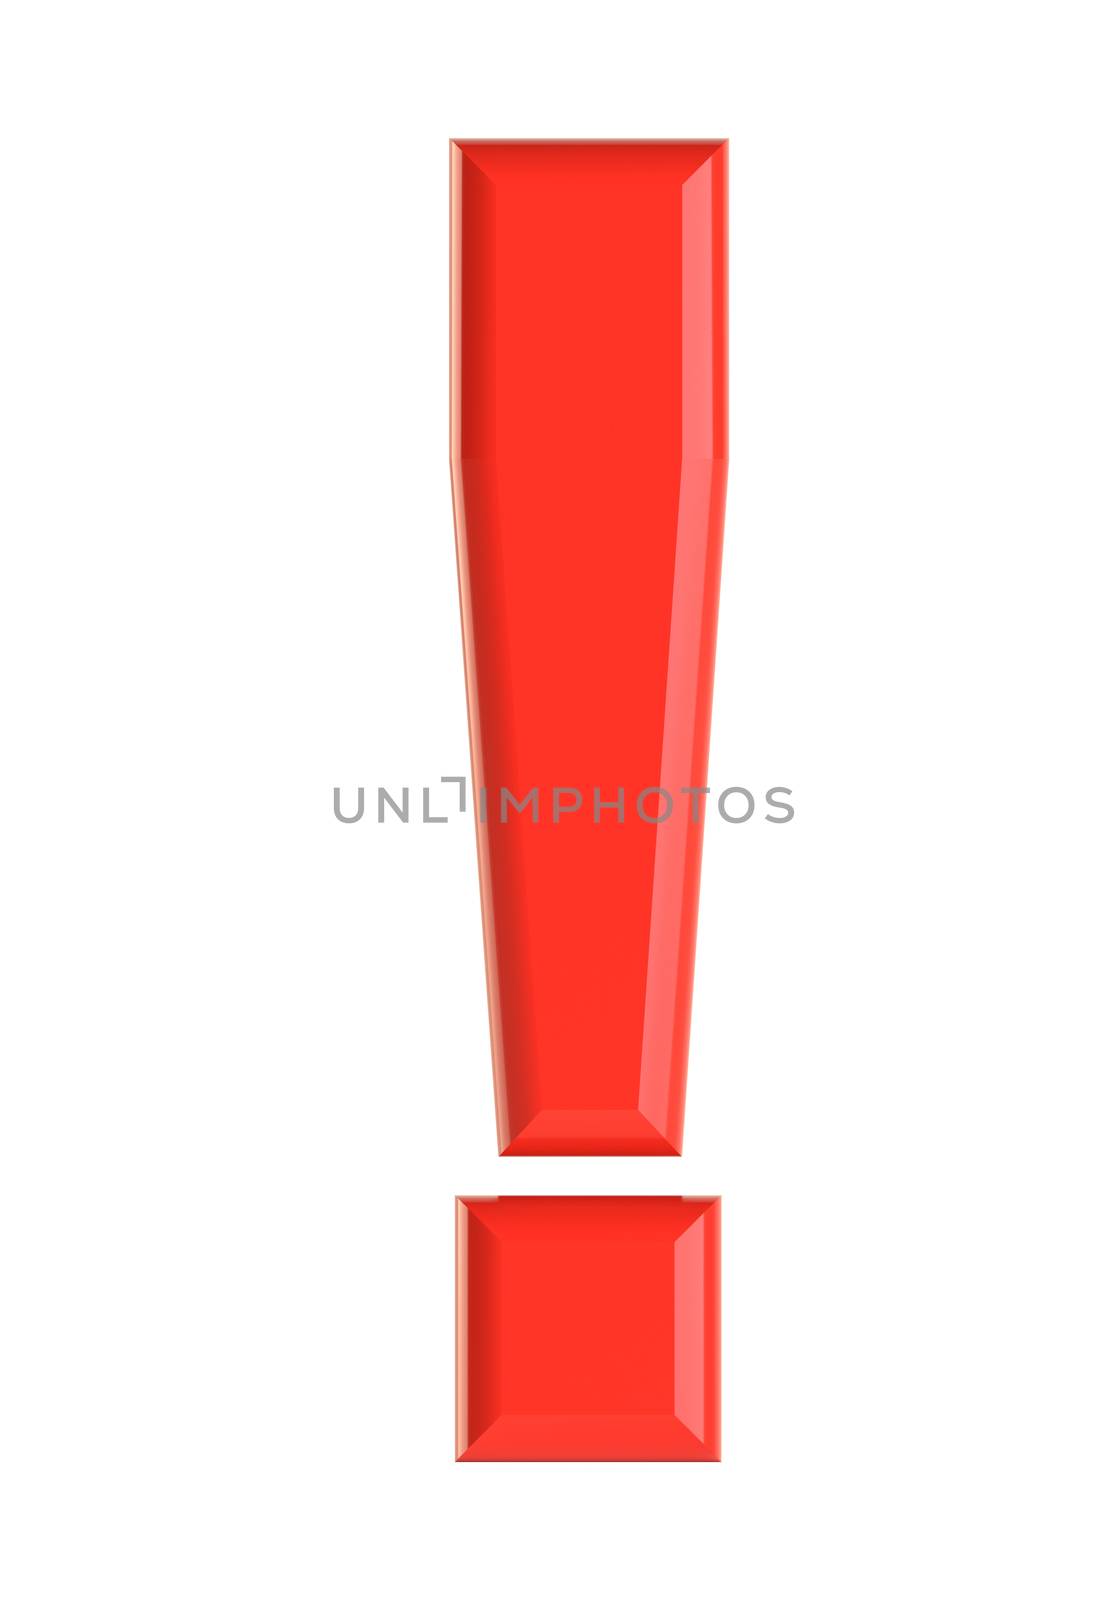 Red exclamation mark. 3D illustration by cherezoff